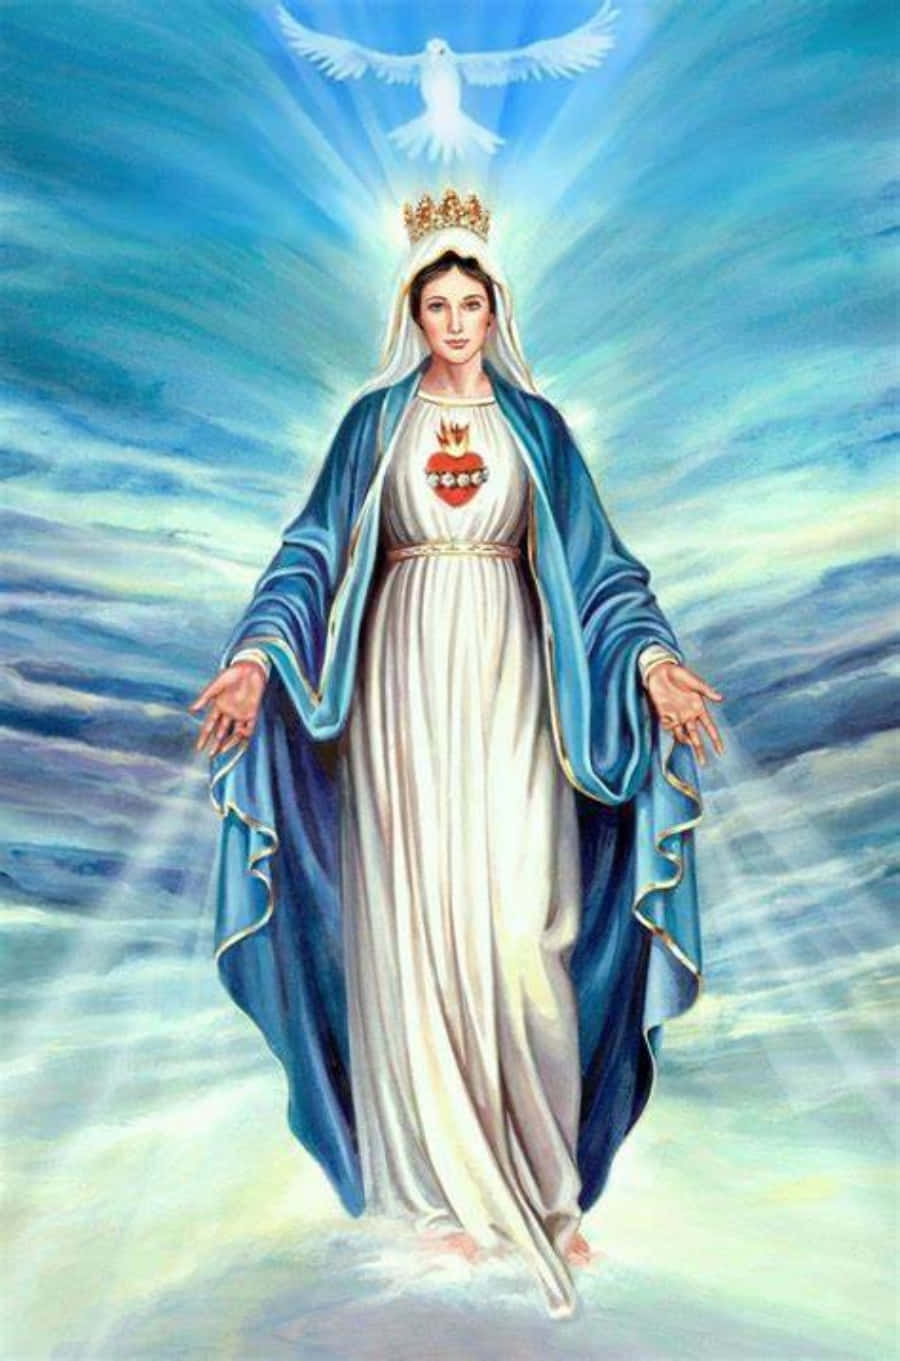 The Virgin Mary With A Dove In The Sky Wallpaper